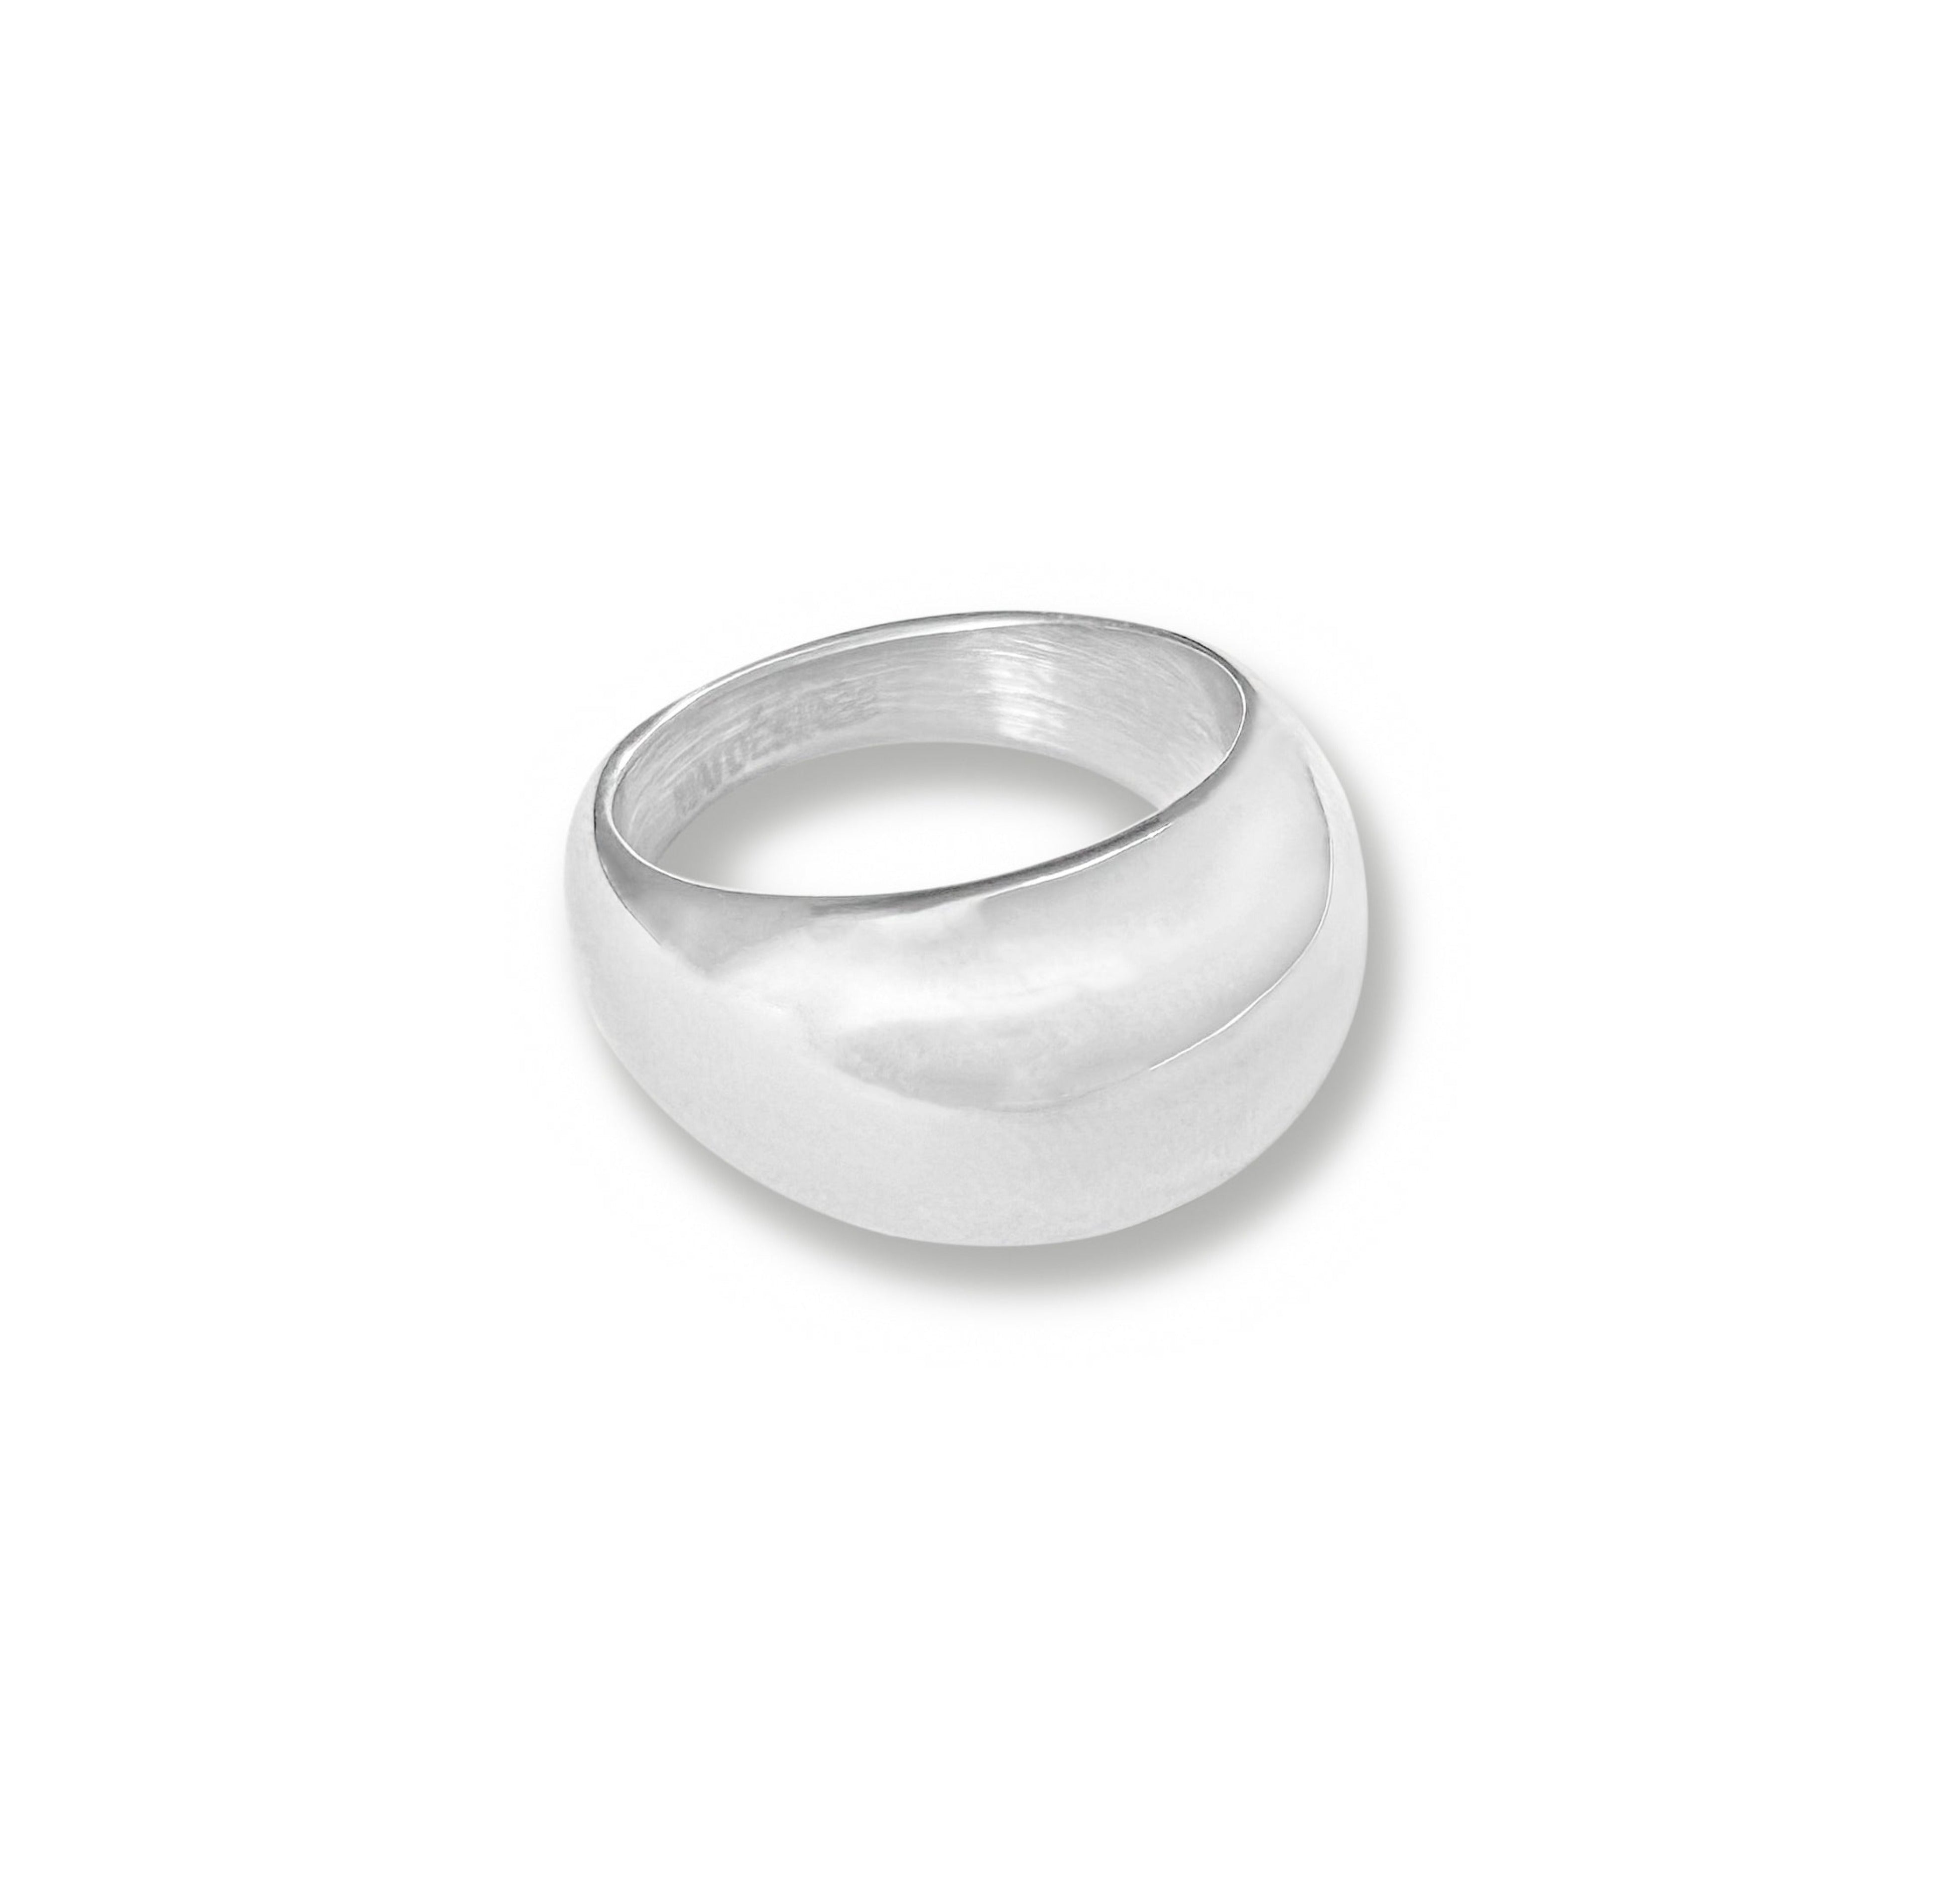 thick silver bubble ring waterproof jewelry